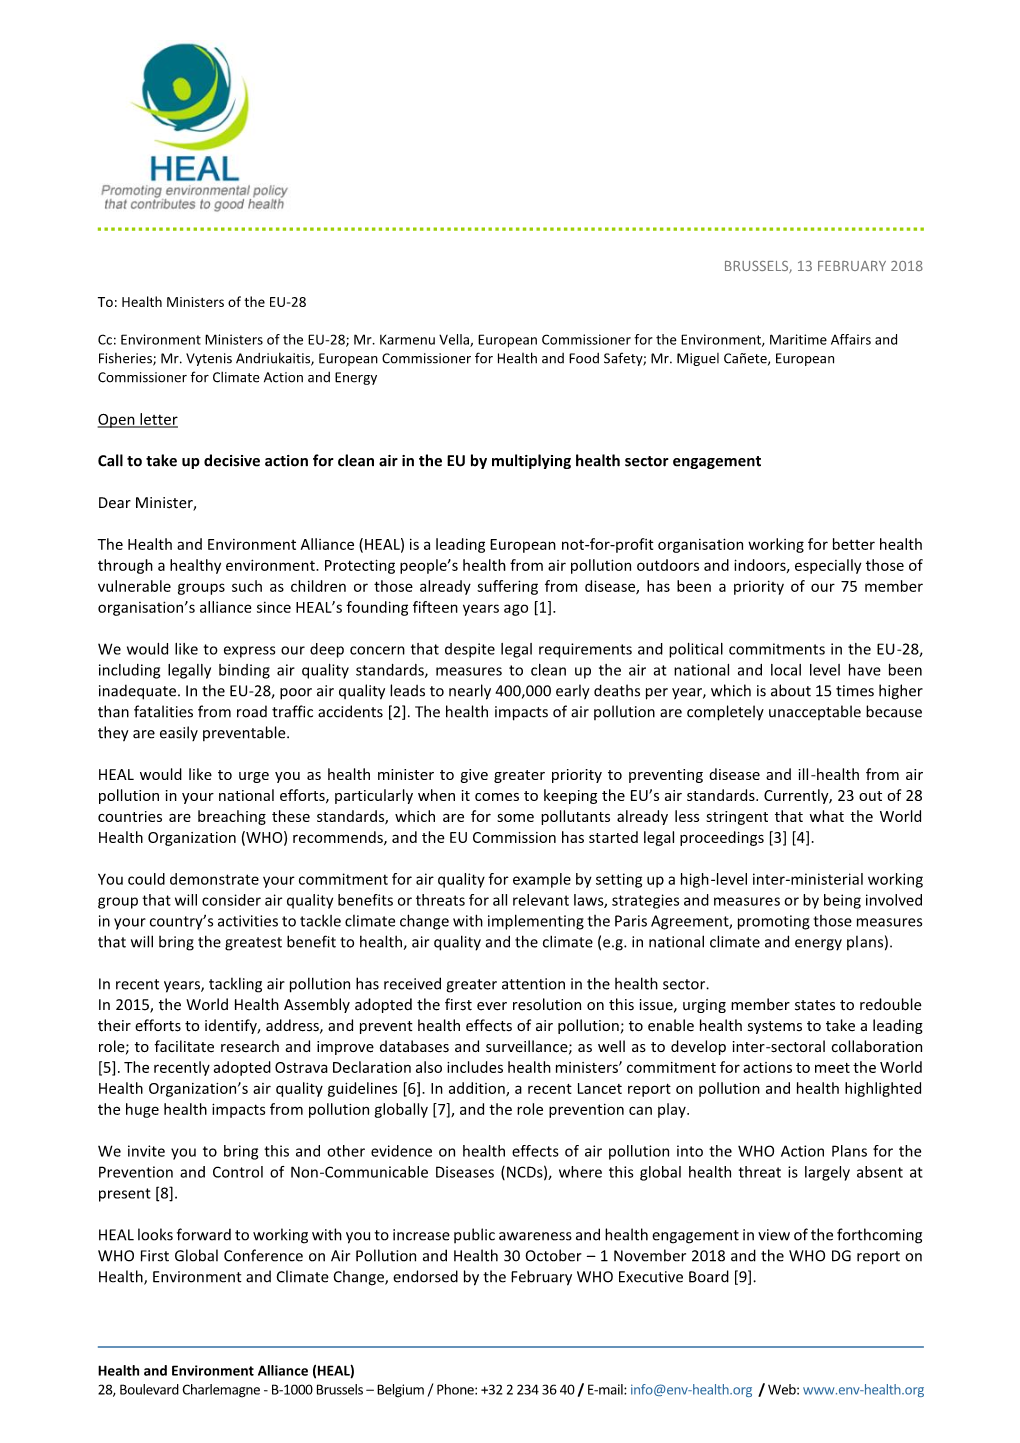 Letter to EU 28 Health Ministers to Take Decisive Action for Clean Air in the EU